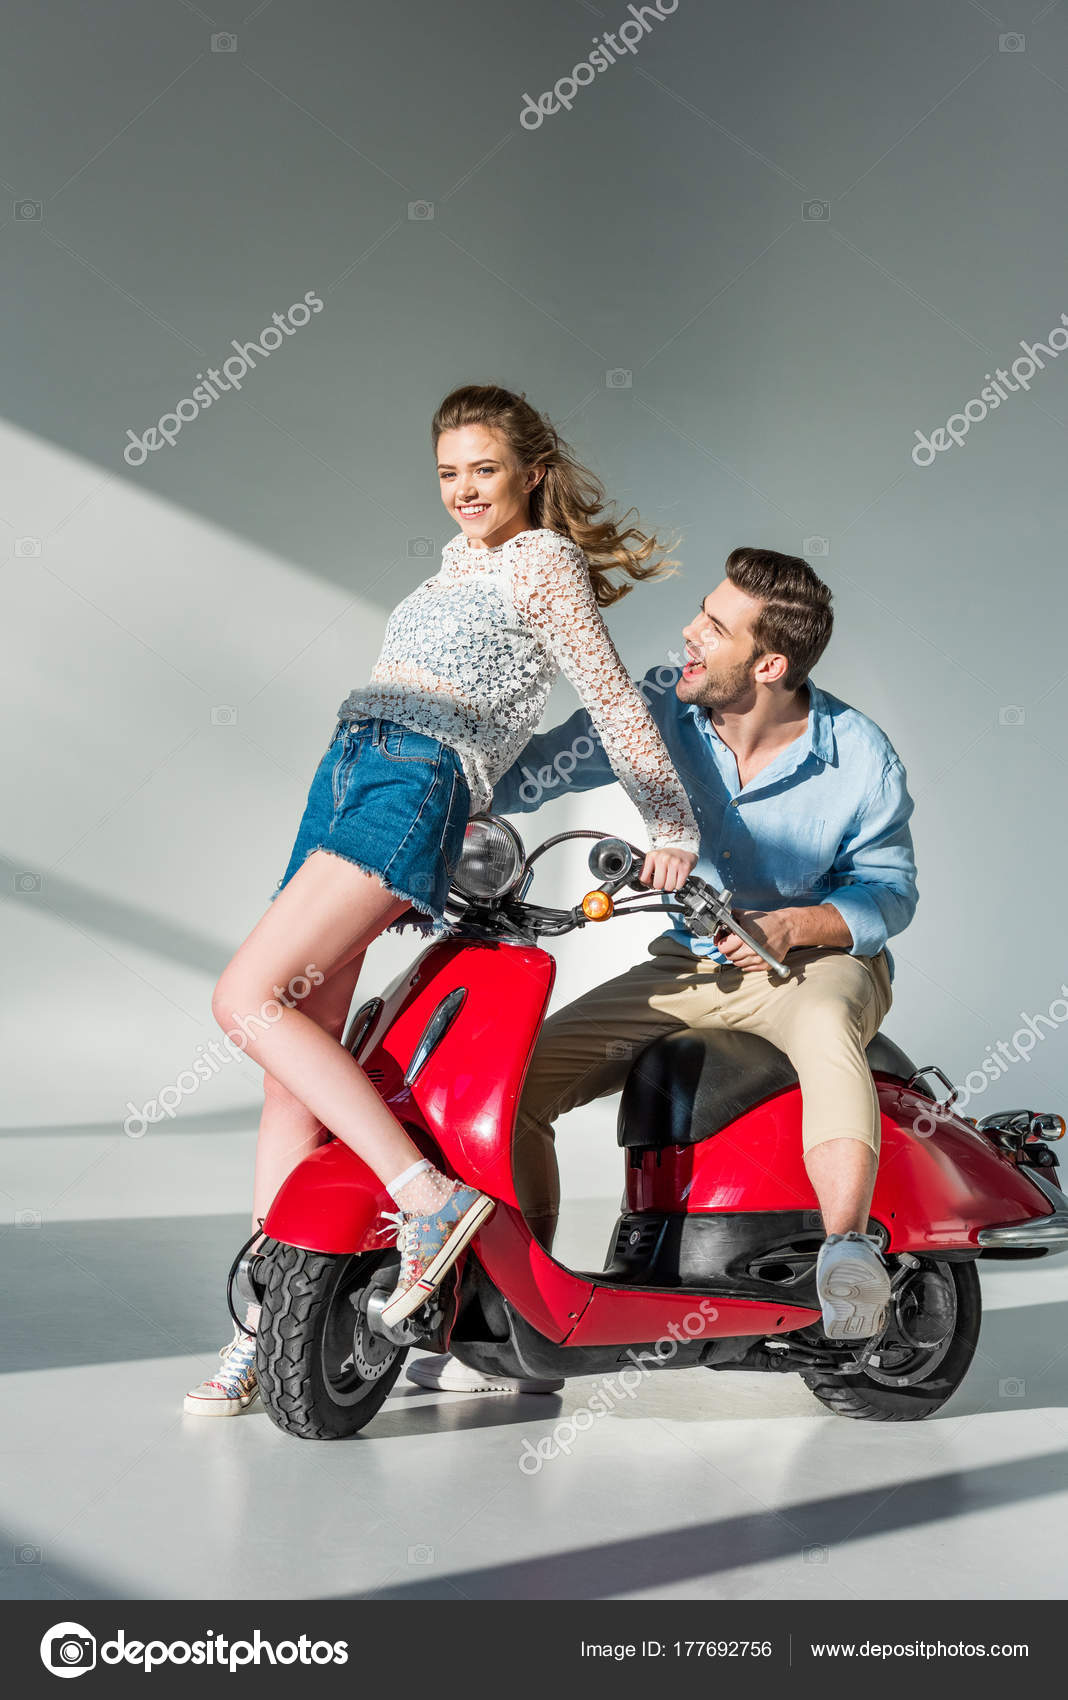 Sexy good looking girl posing on stylish scooter. Stock Photo by fxquadro